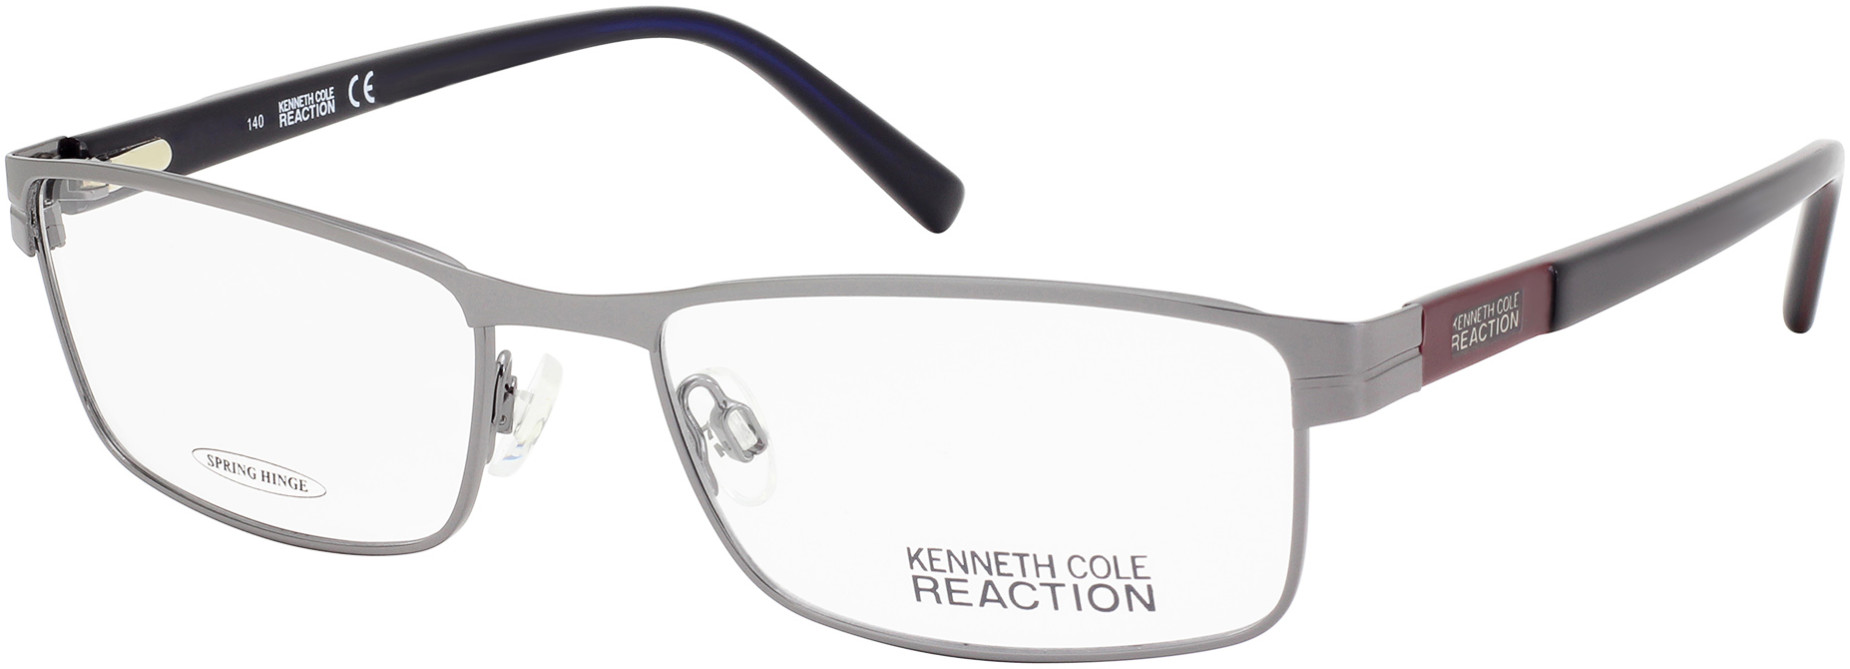 KENNETH COLE NY 0752 008